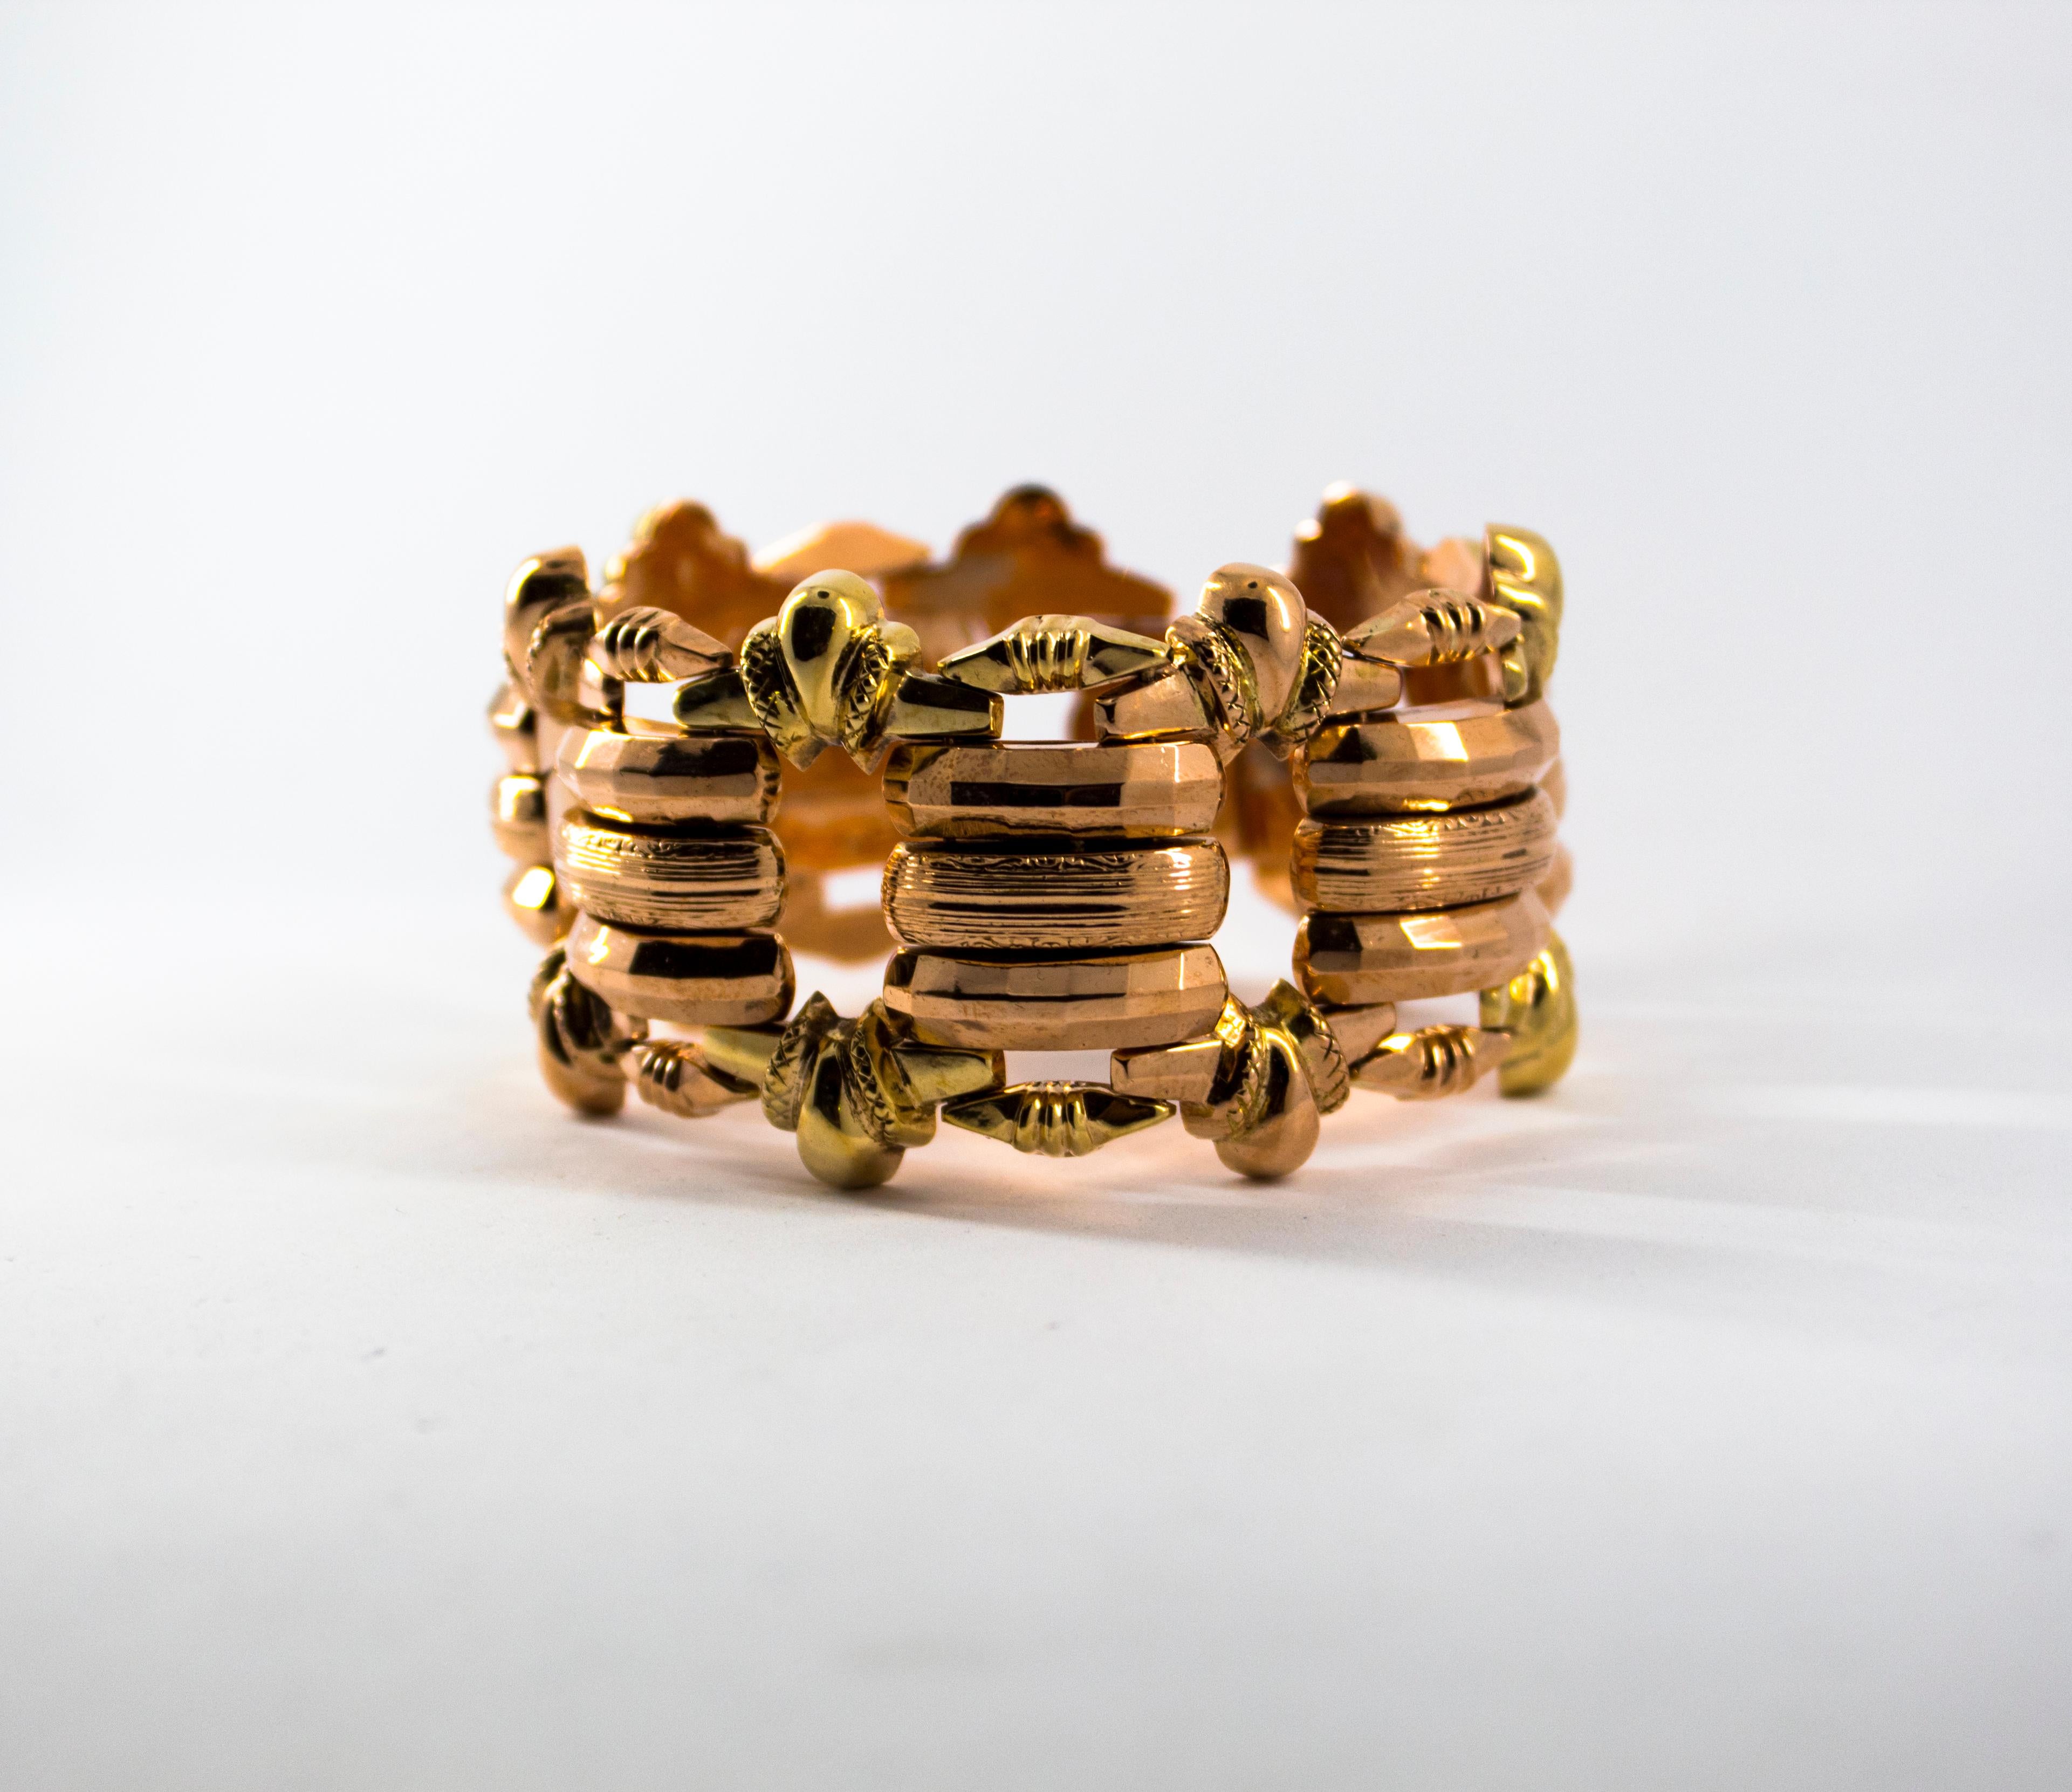 This Bracelet is made of 12K Yellow and Rose Gold.
This Bracelet is an Art Deco Antique Handmade Jewel.
We're a workshop so every piece is handmade, customizable and resizable.